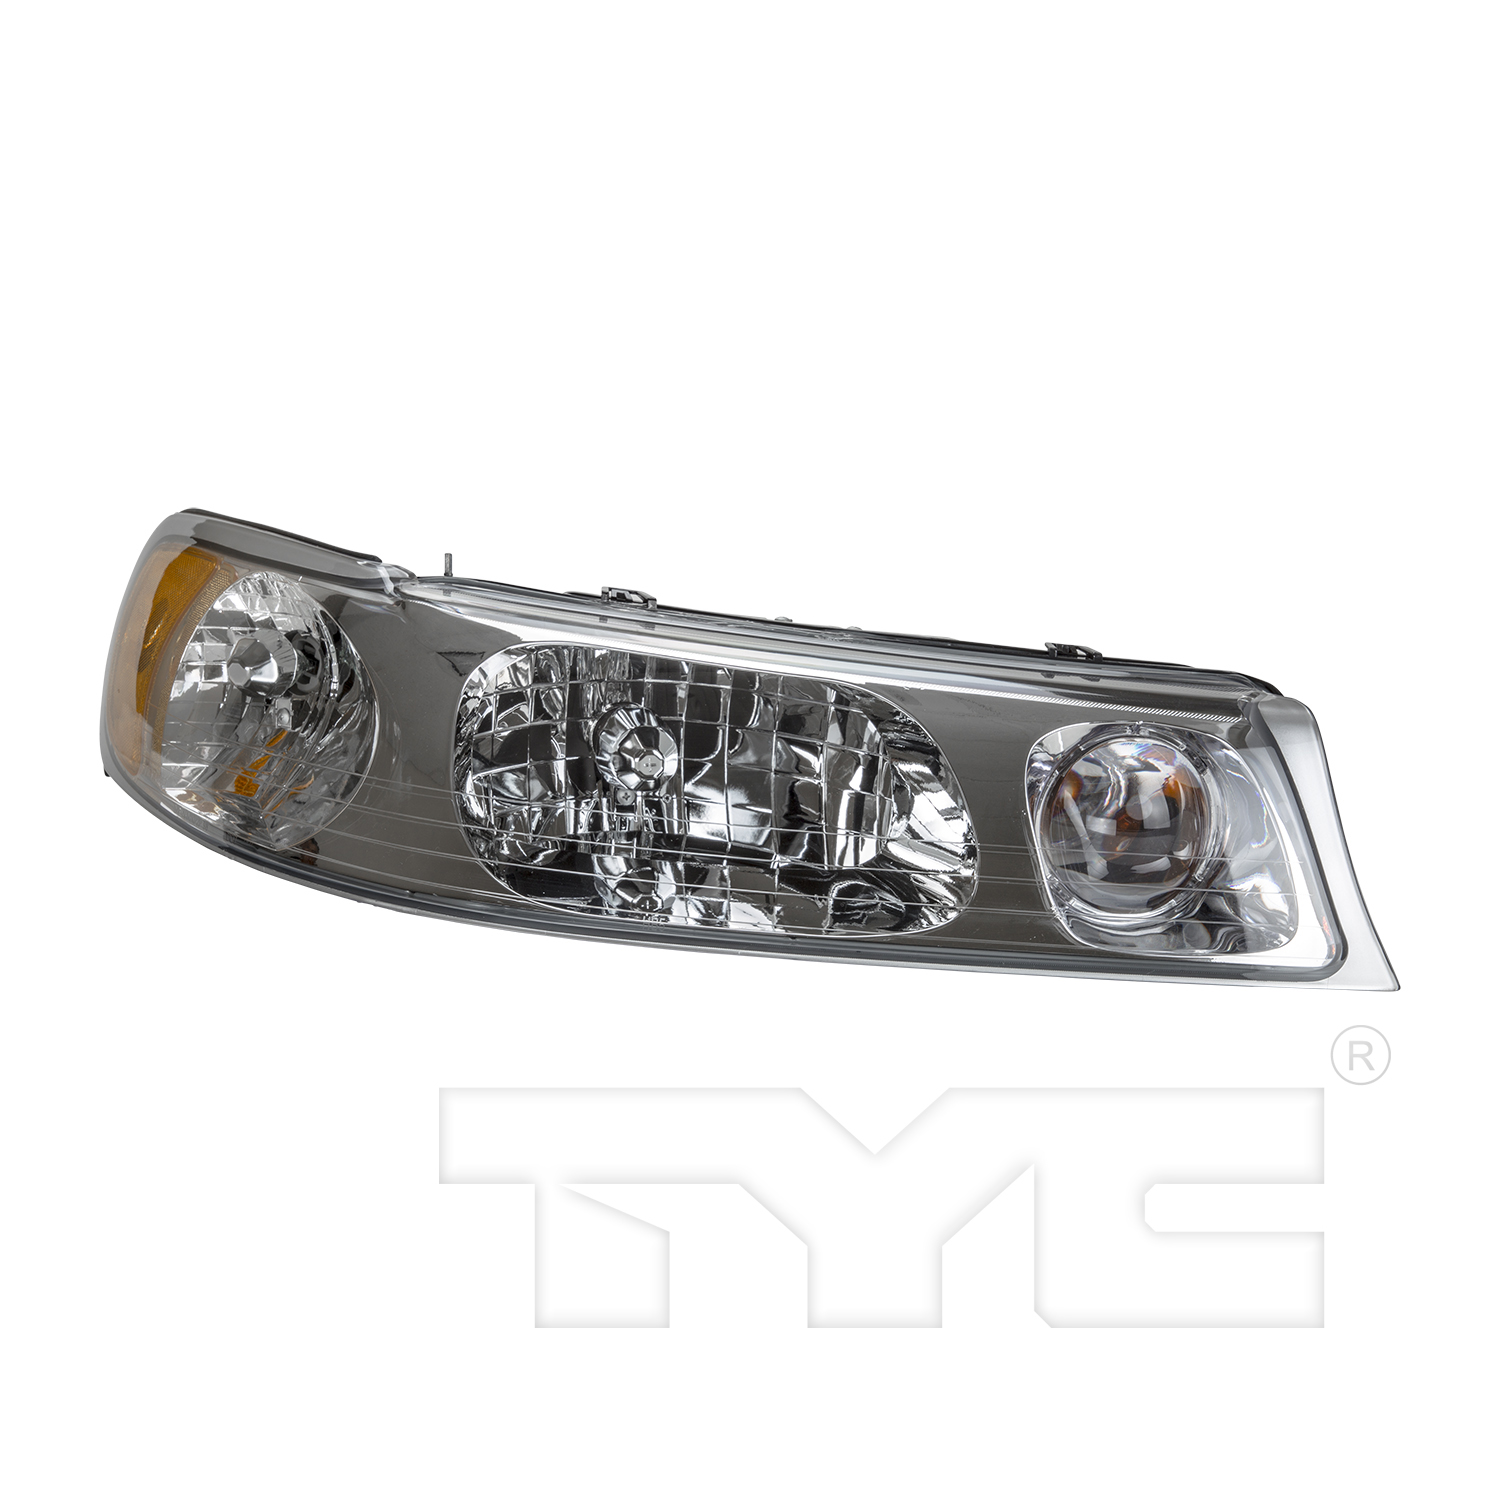 Aftermarket HEADLIGHTS for LINCOLN - TOWN CAR, TOWN CAR,98-02,RT Headlamp assy composite